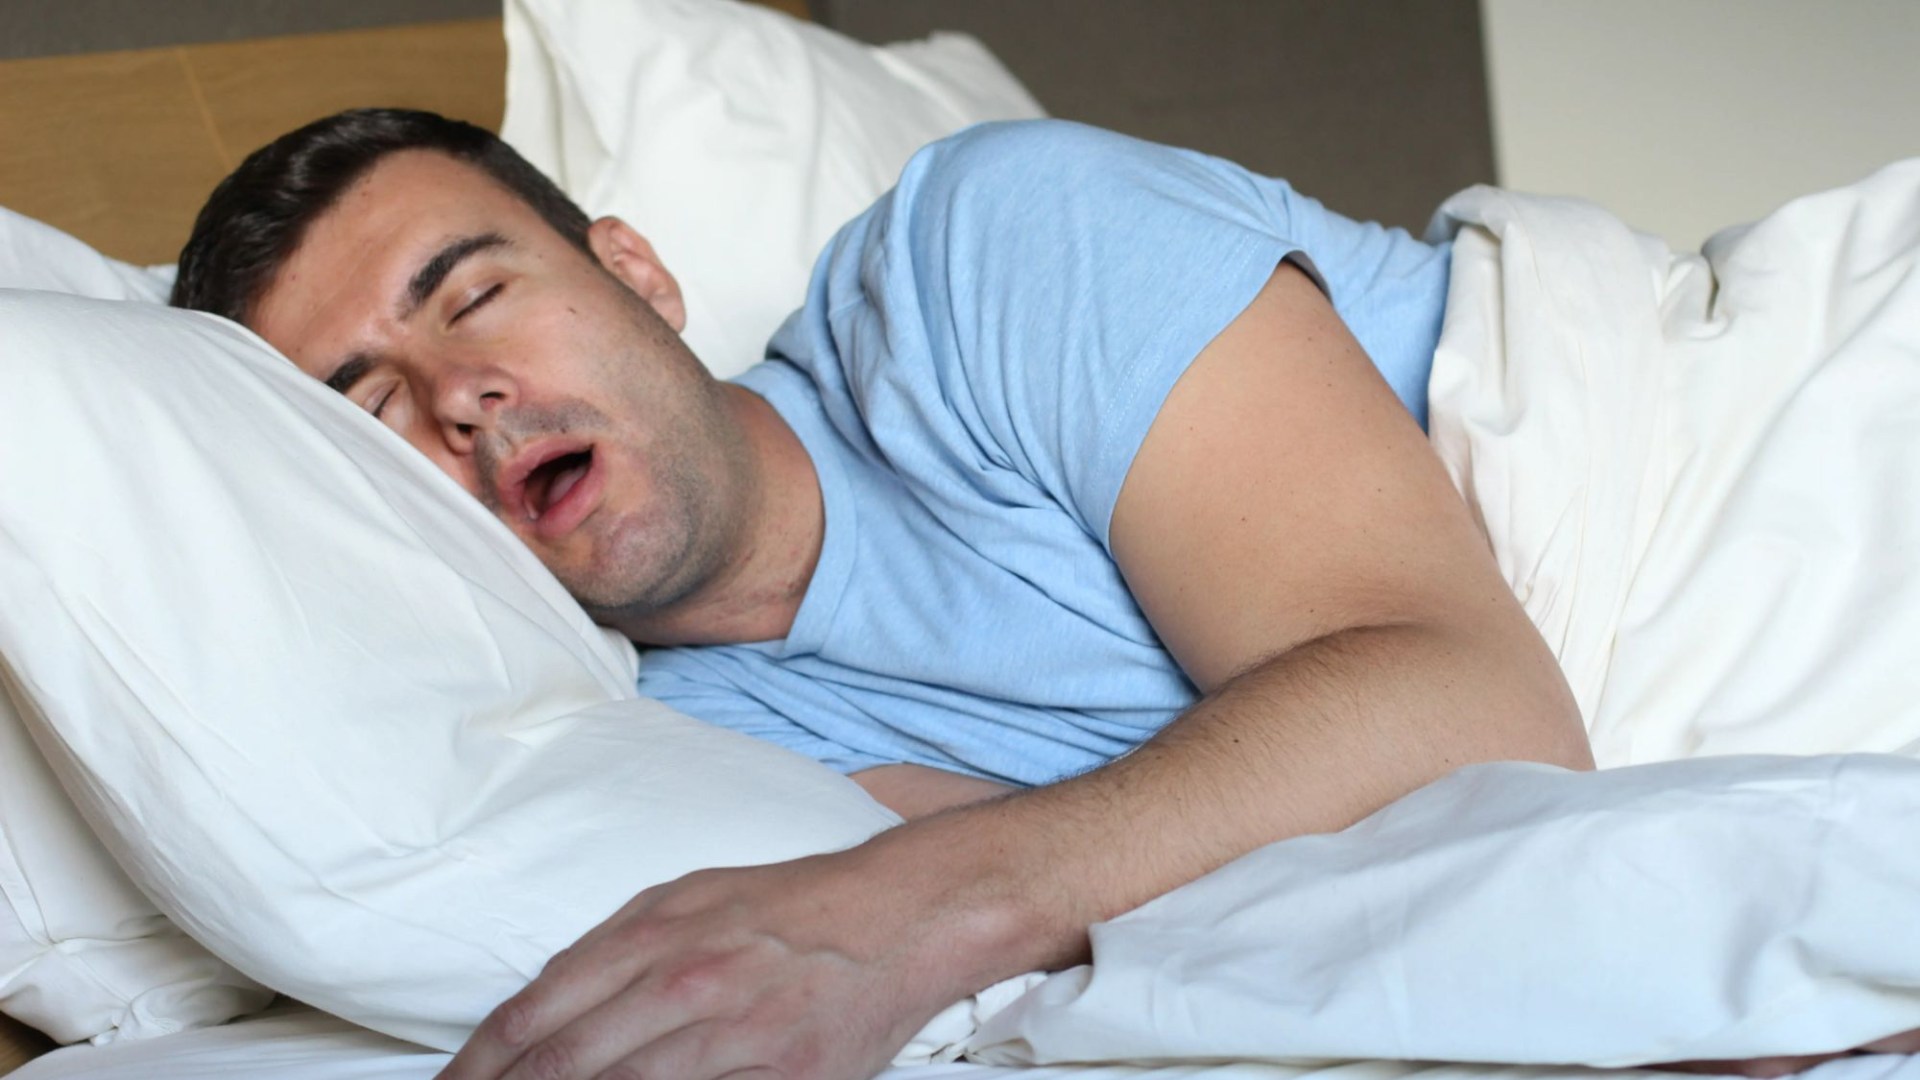 ‘King Kong’ of weight loss jabs could help ‘cure’ snoring by targeting killer underlying condition [Video]